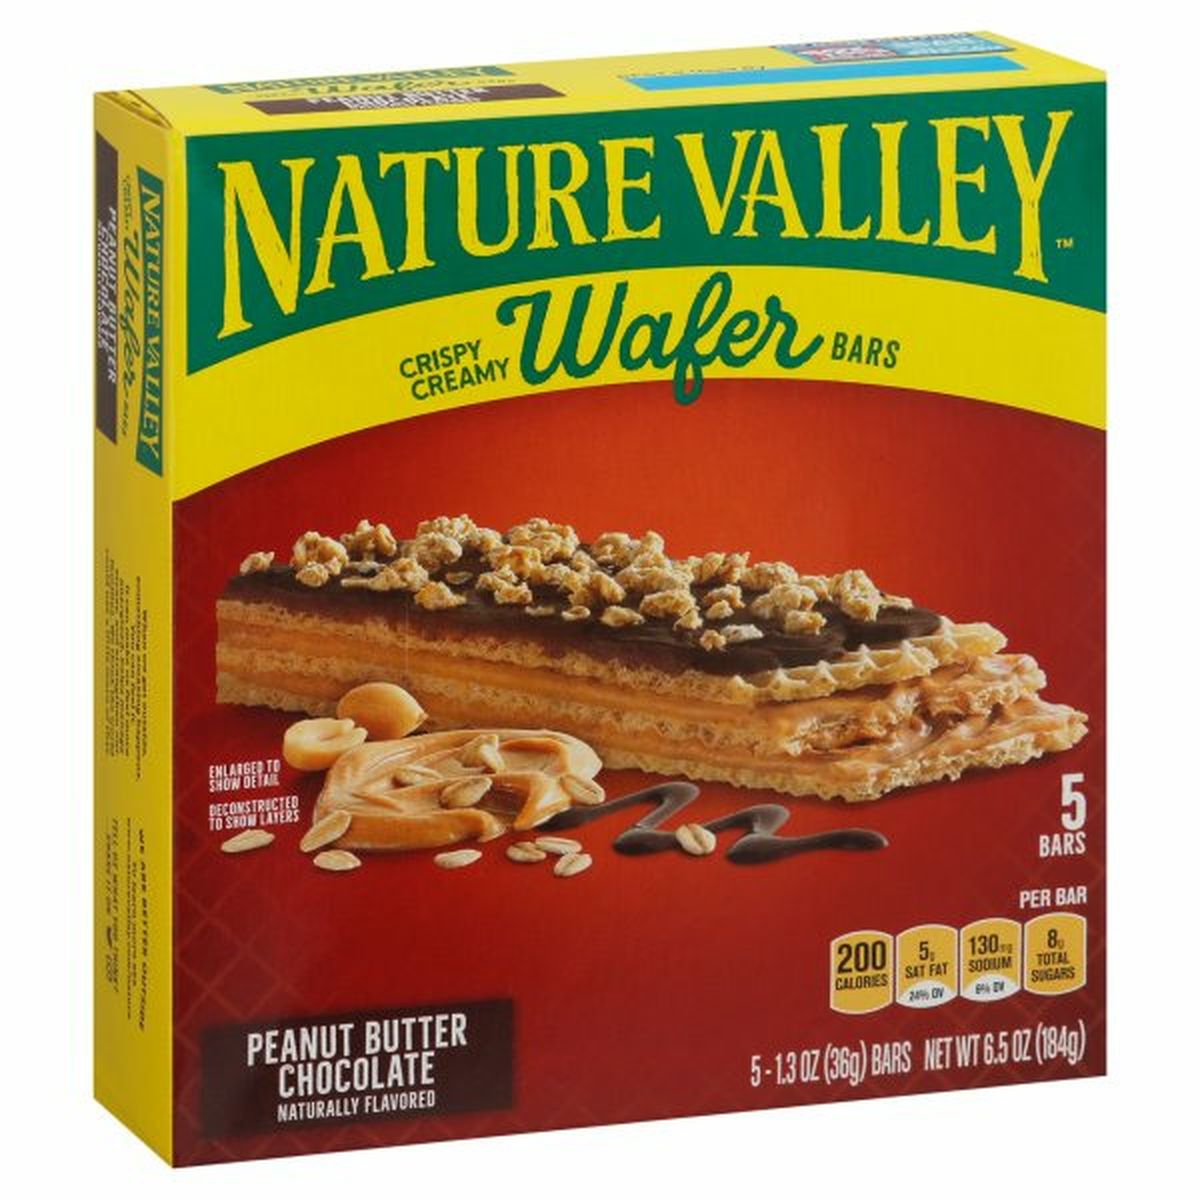 Calories in Nature Valley Wafer Bars, Peanut Butter Chocolate, Crispy Creamy